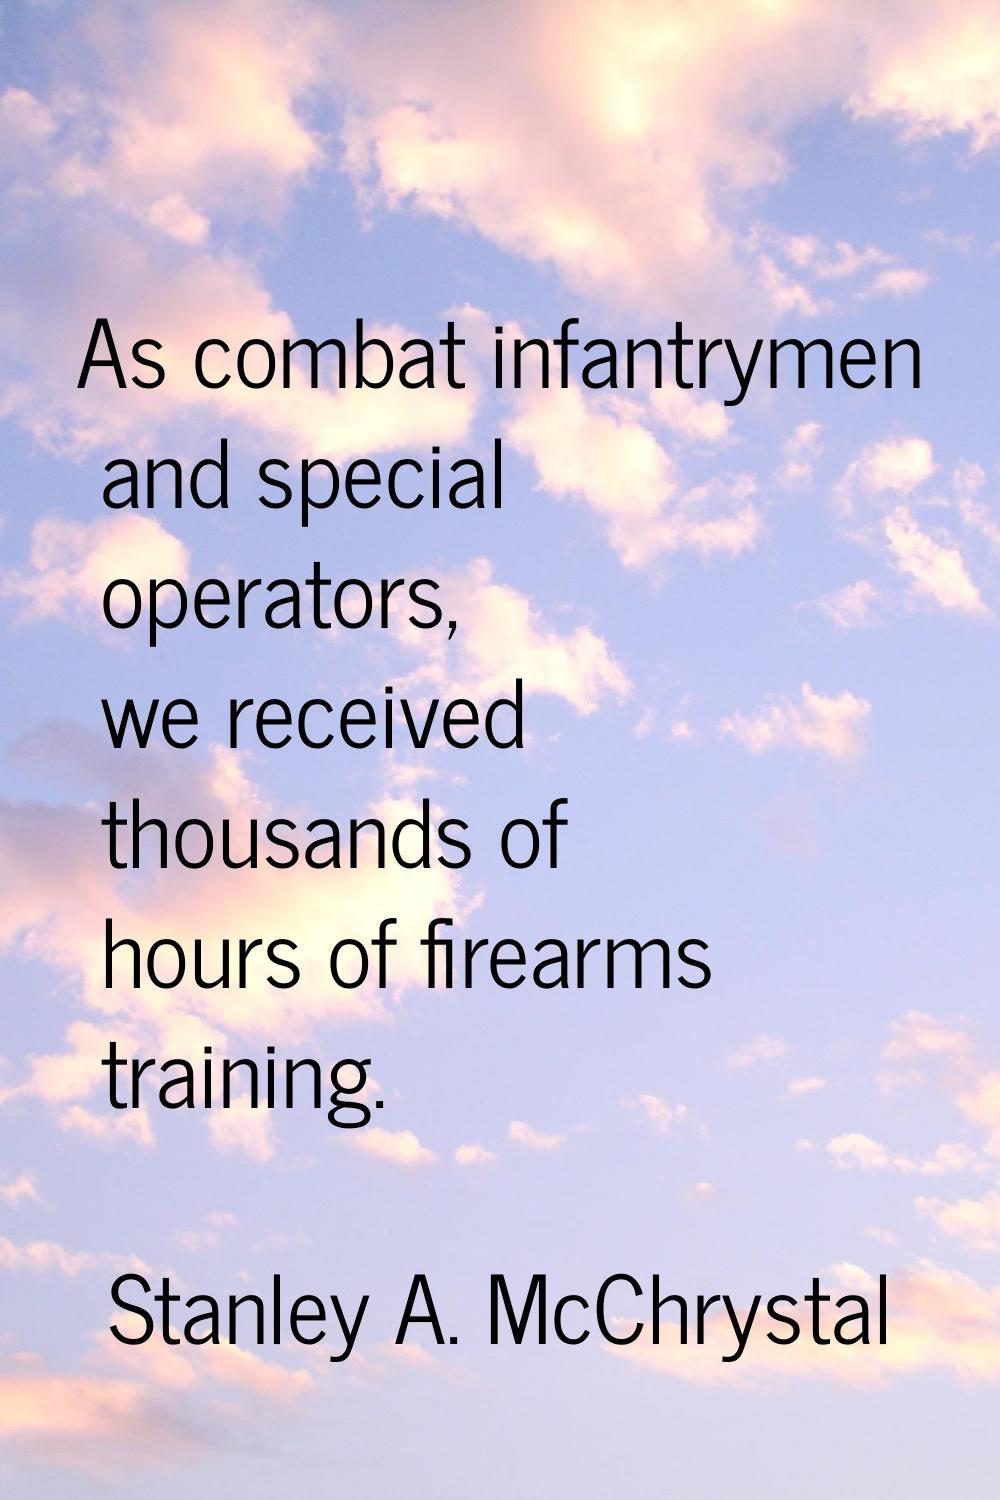 As combat infantrymen and special operators, we received thousands of hours of firearms training.